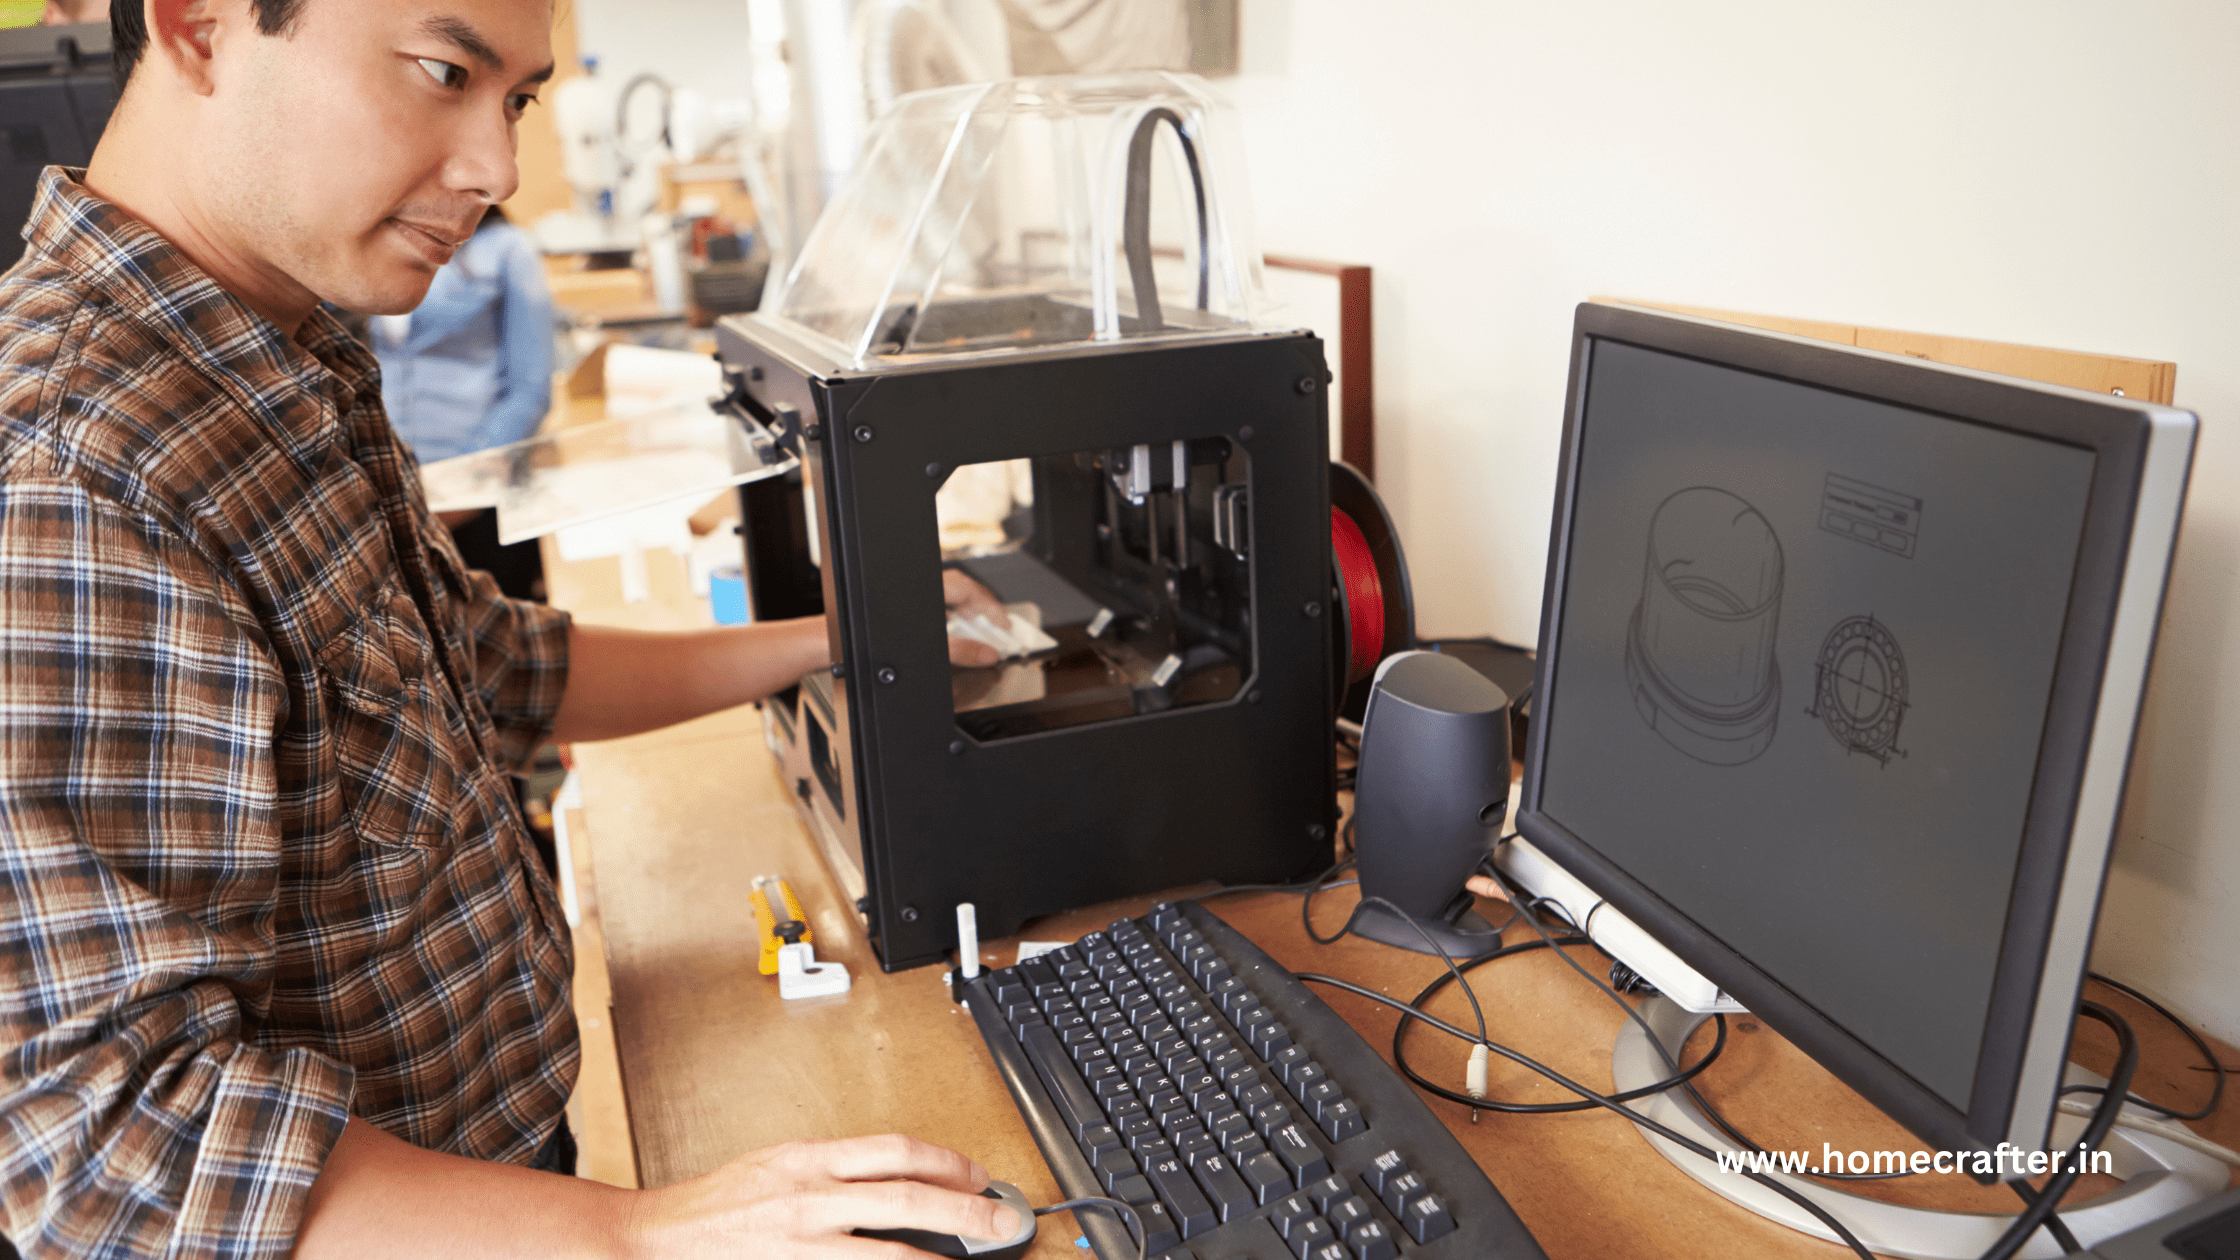 1. An image showcasing a high-resolution 3D printer with a printed object in focus, highlighting the fine details.